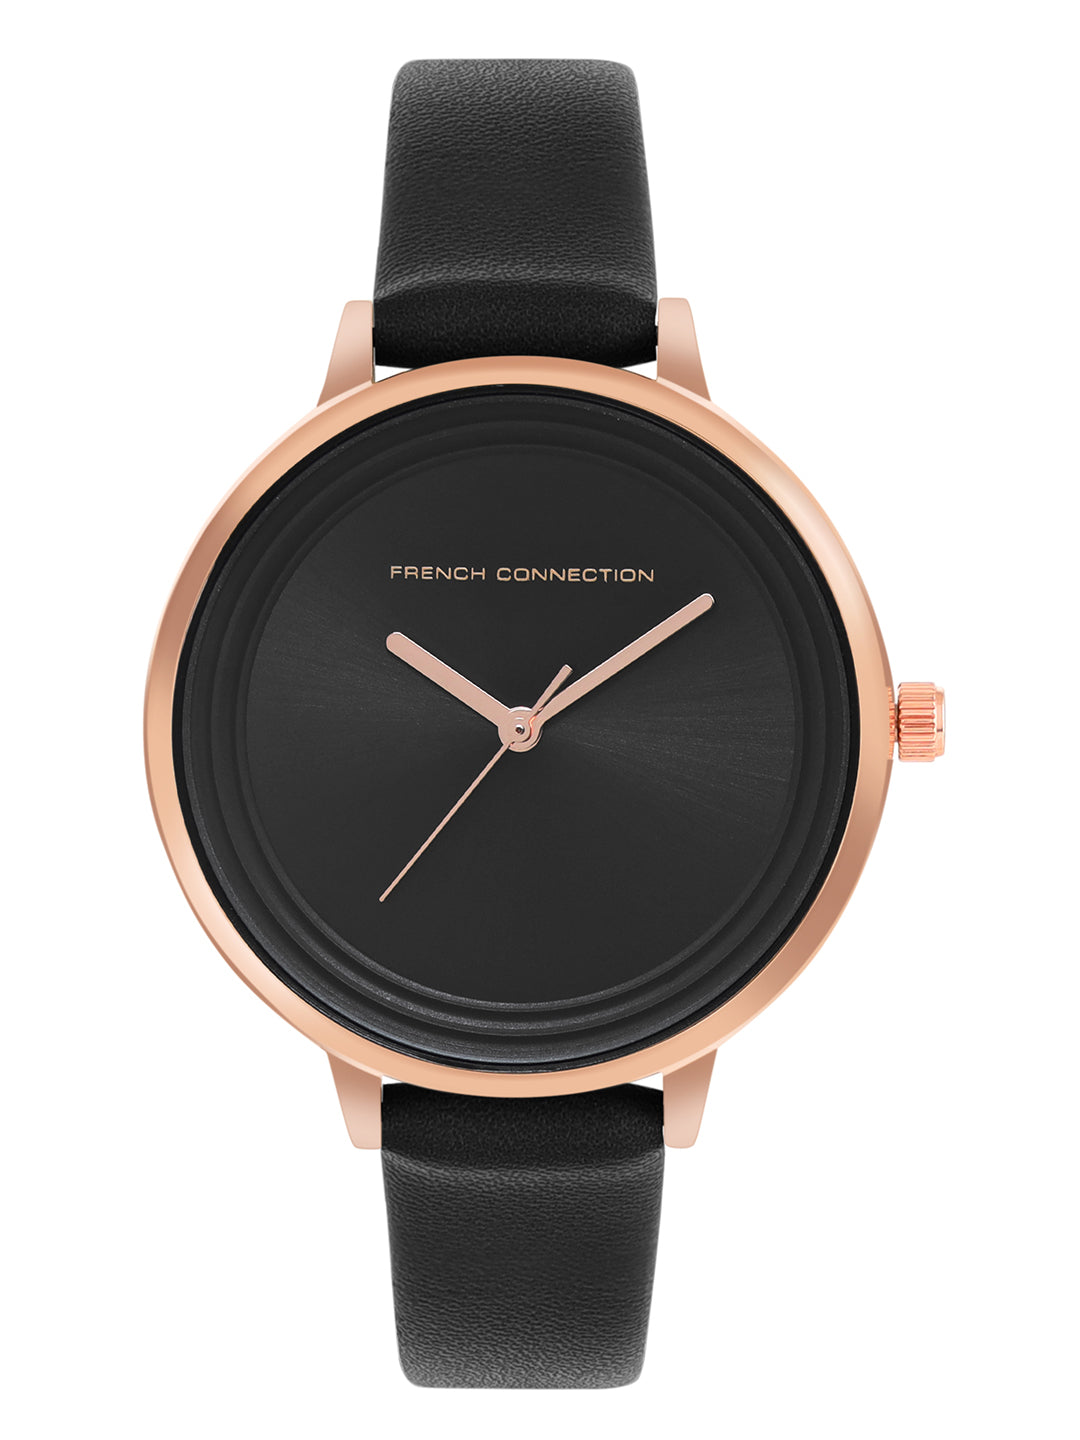 French Connection Analog Black Dial Women's Watch-FCN0001T